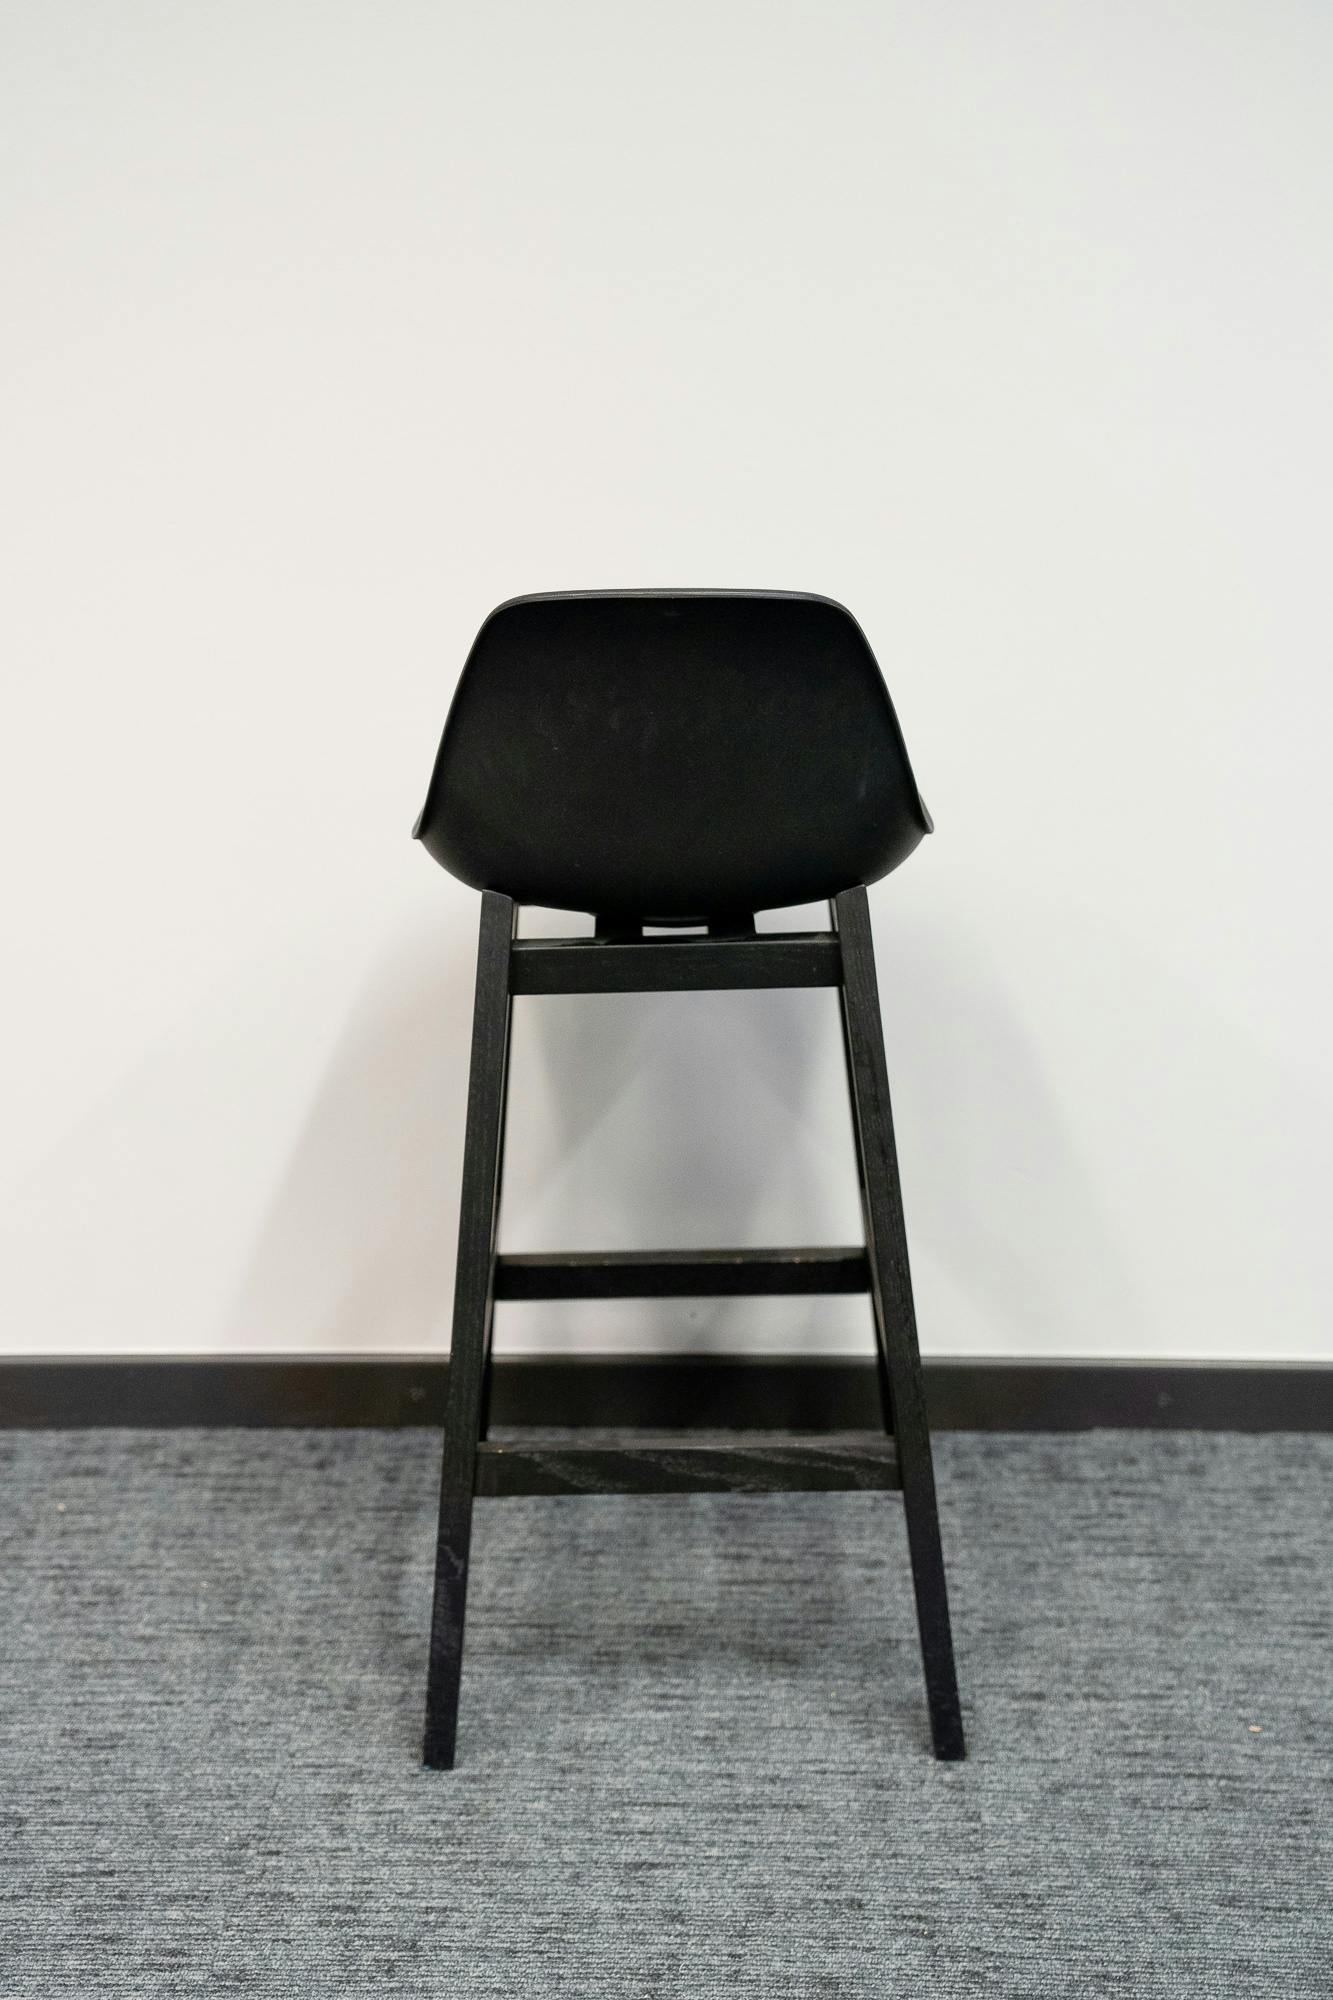 Black leather stool, small seat - Second hand quality "Chairs" - Relieve Furniture